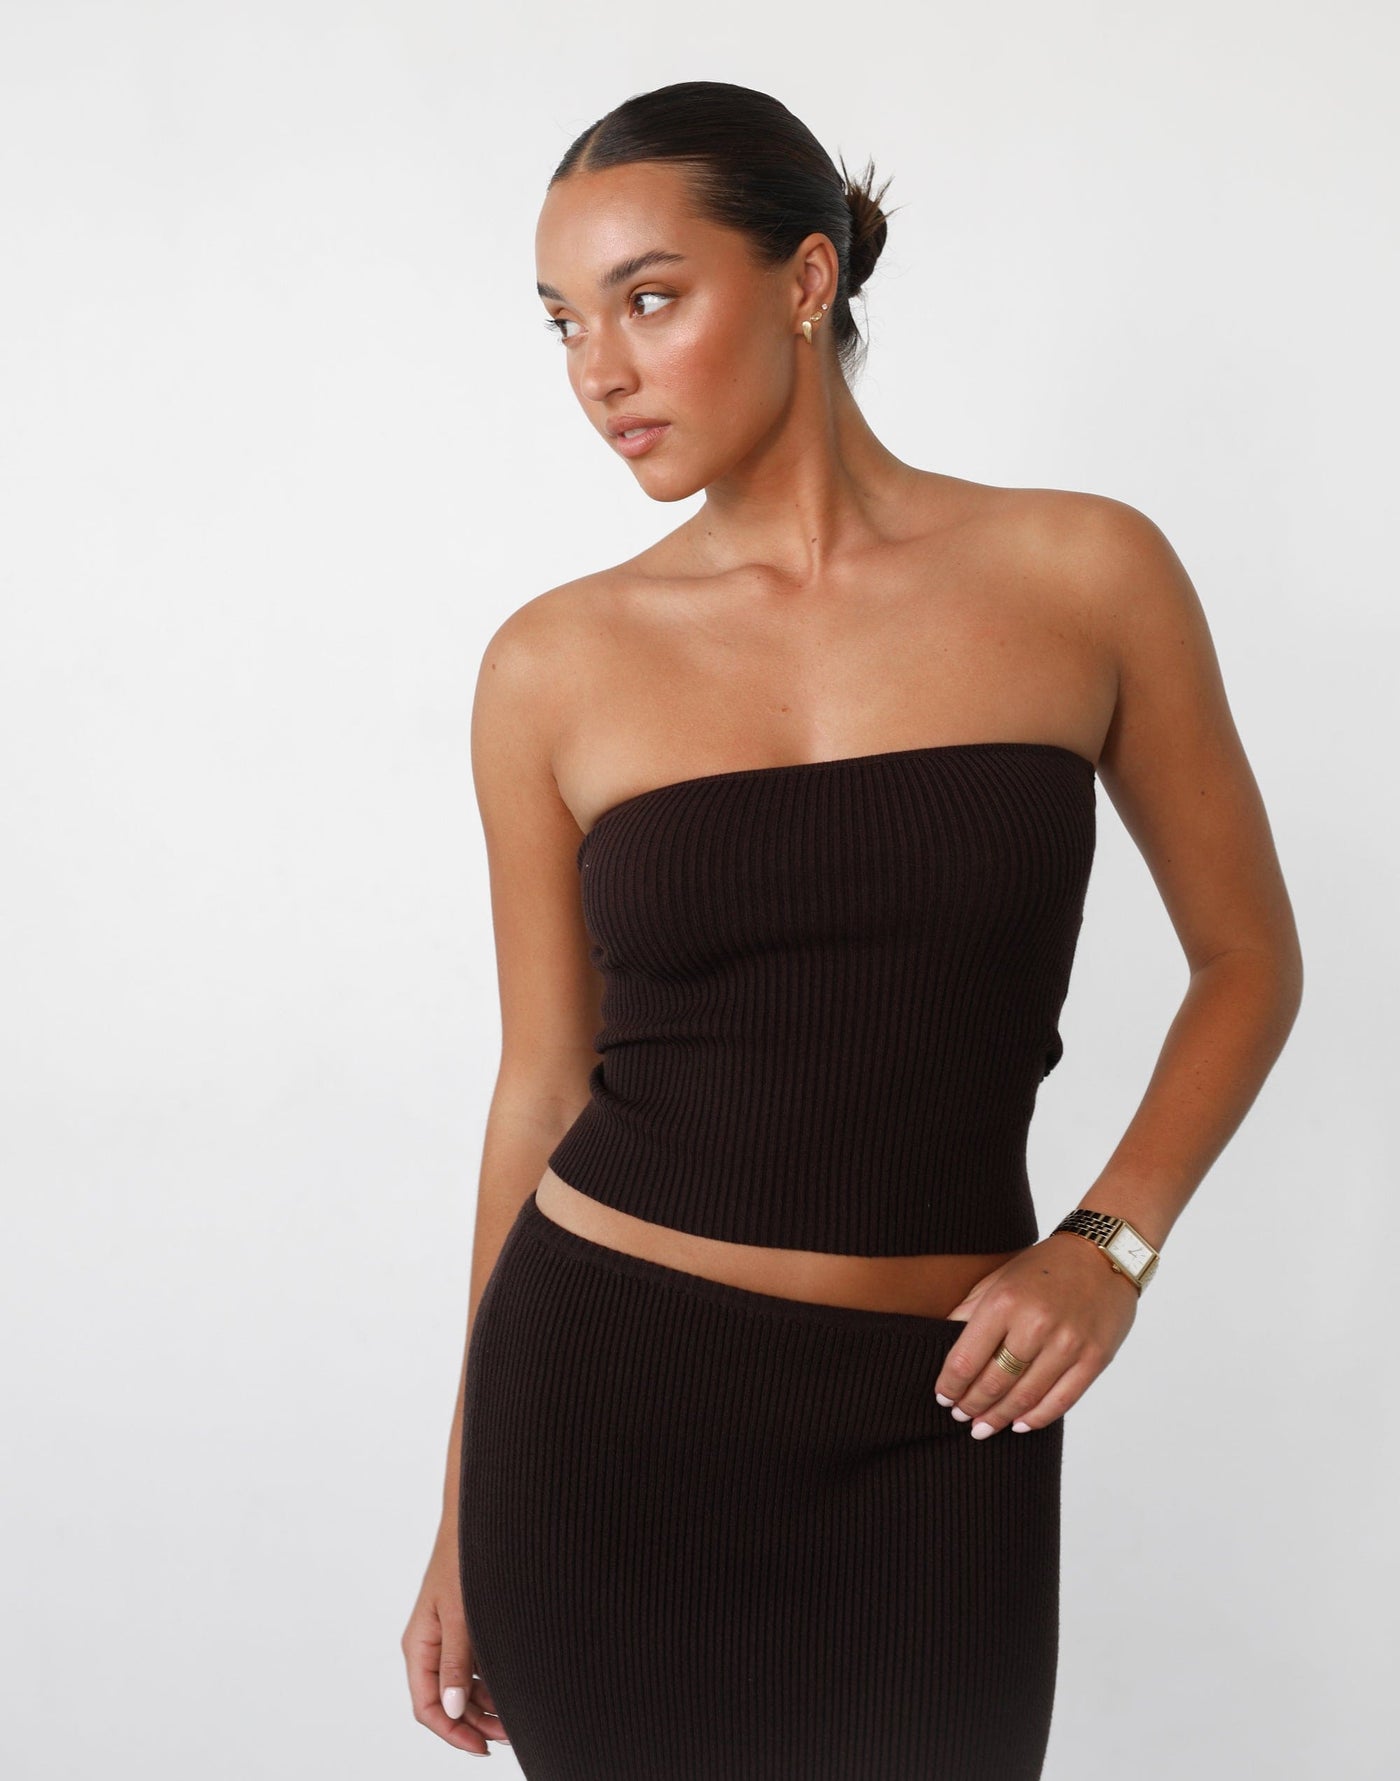 Nate Knit Maxi Skirt (Chocolate) - Low/Mid Rise Ribbed Knit Maxi Skirt - Women's Skirt - Charcoal Clothing